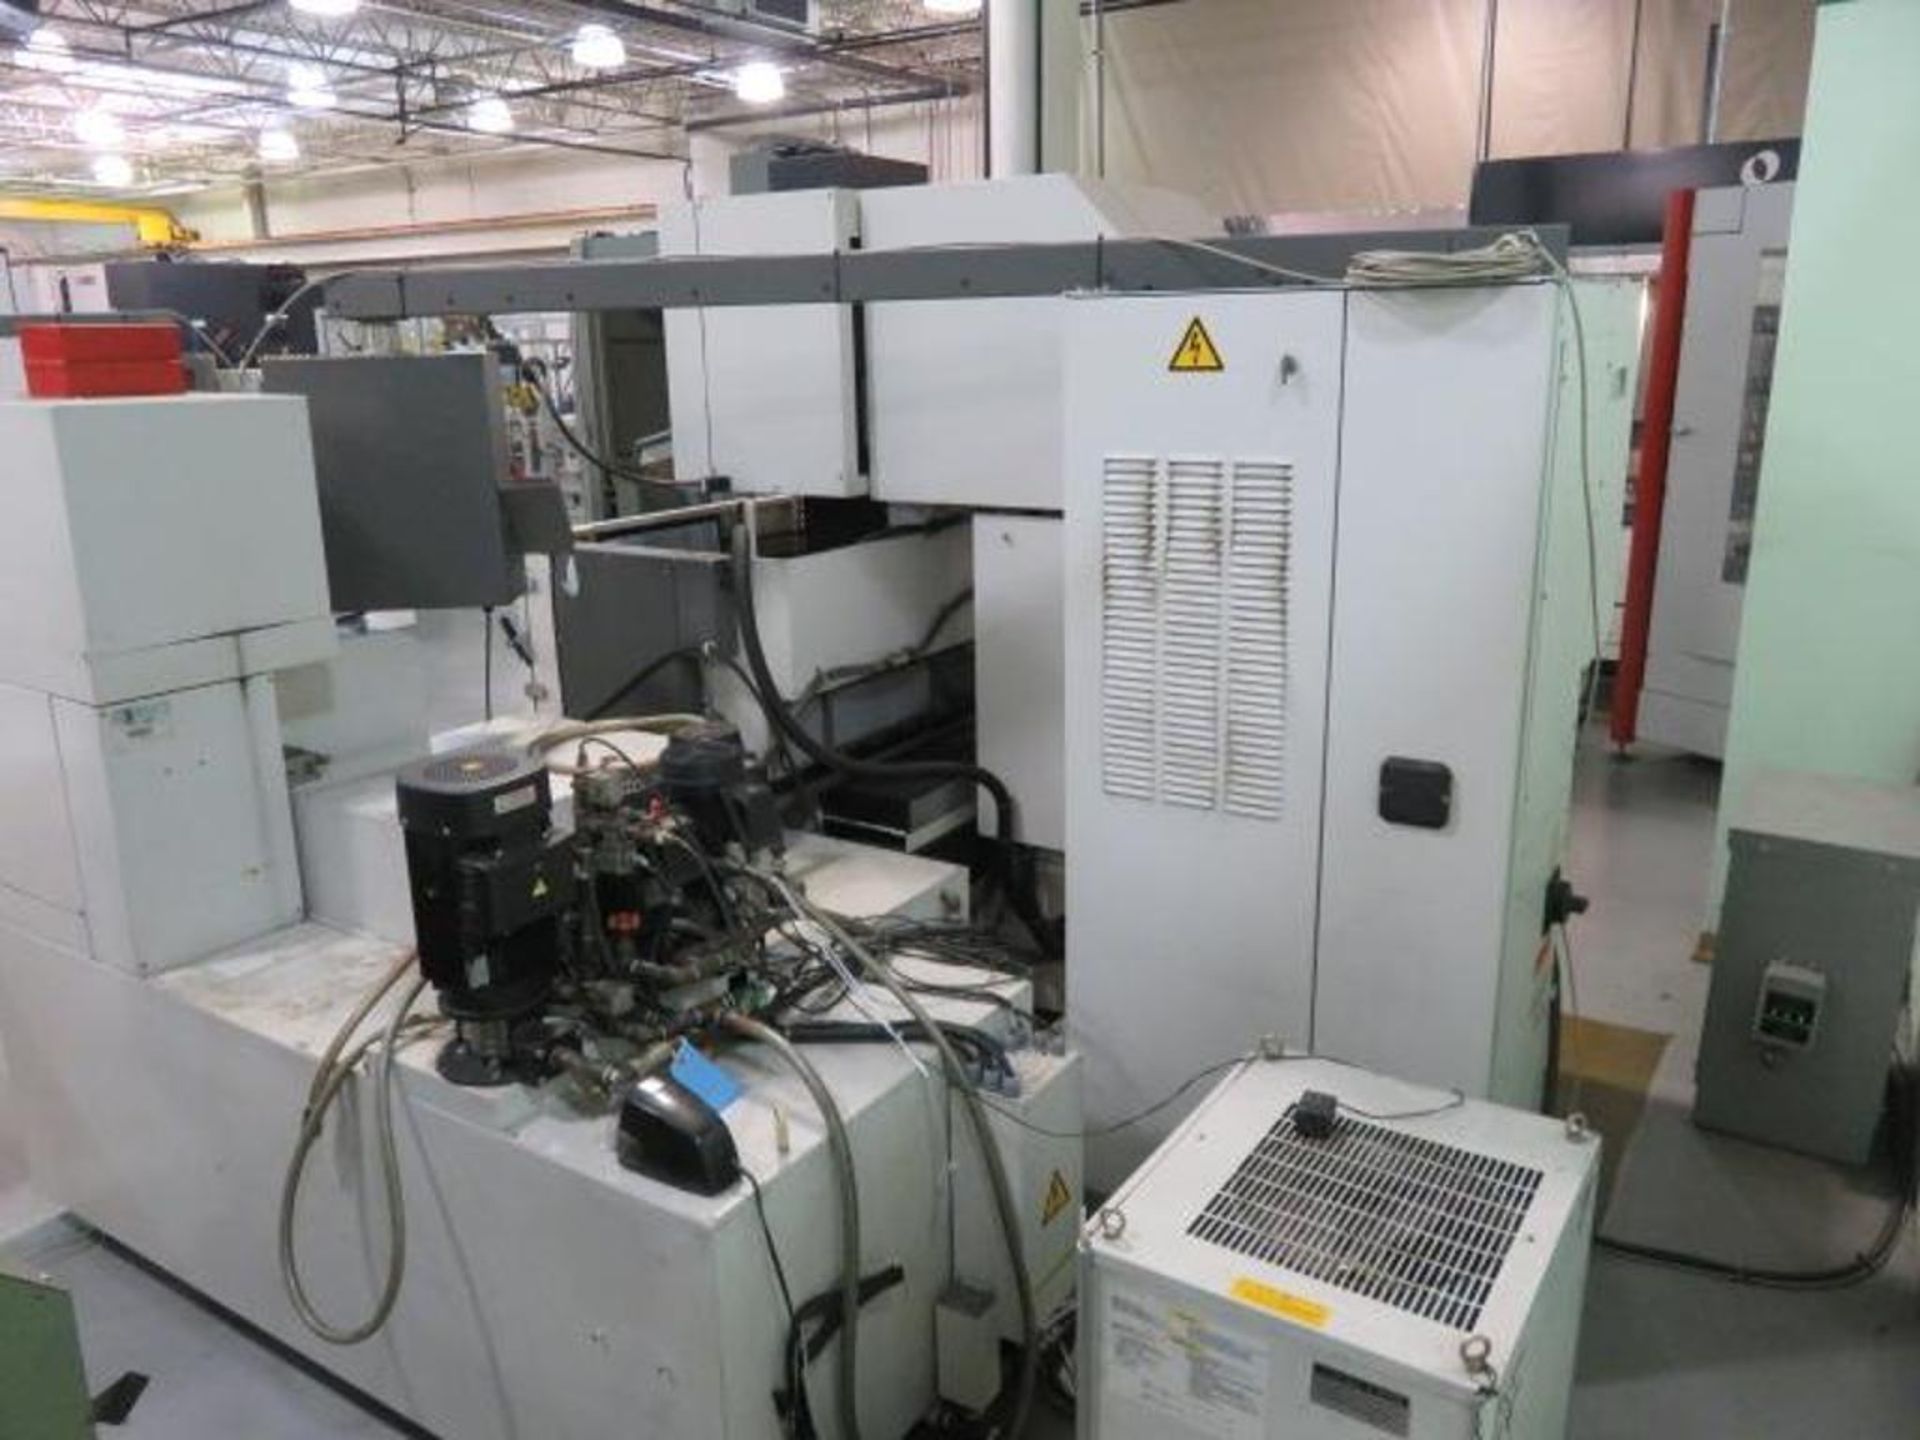 Fanuc 4-Axis CNC Wire EDM Machine Model Robocut AX-1iC, S/N P051C1572 (2005), 43 in. x 33 in. x 21 i - Image 3 of 5